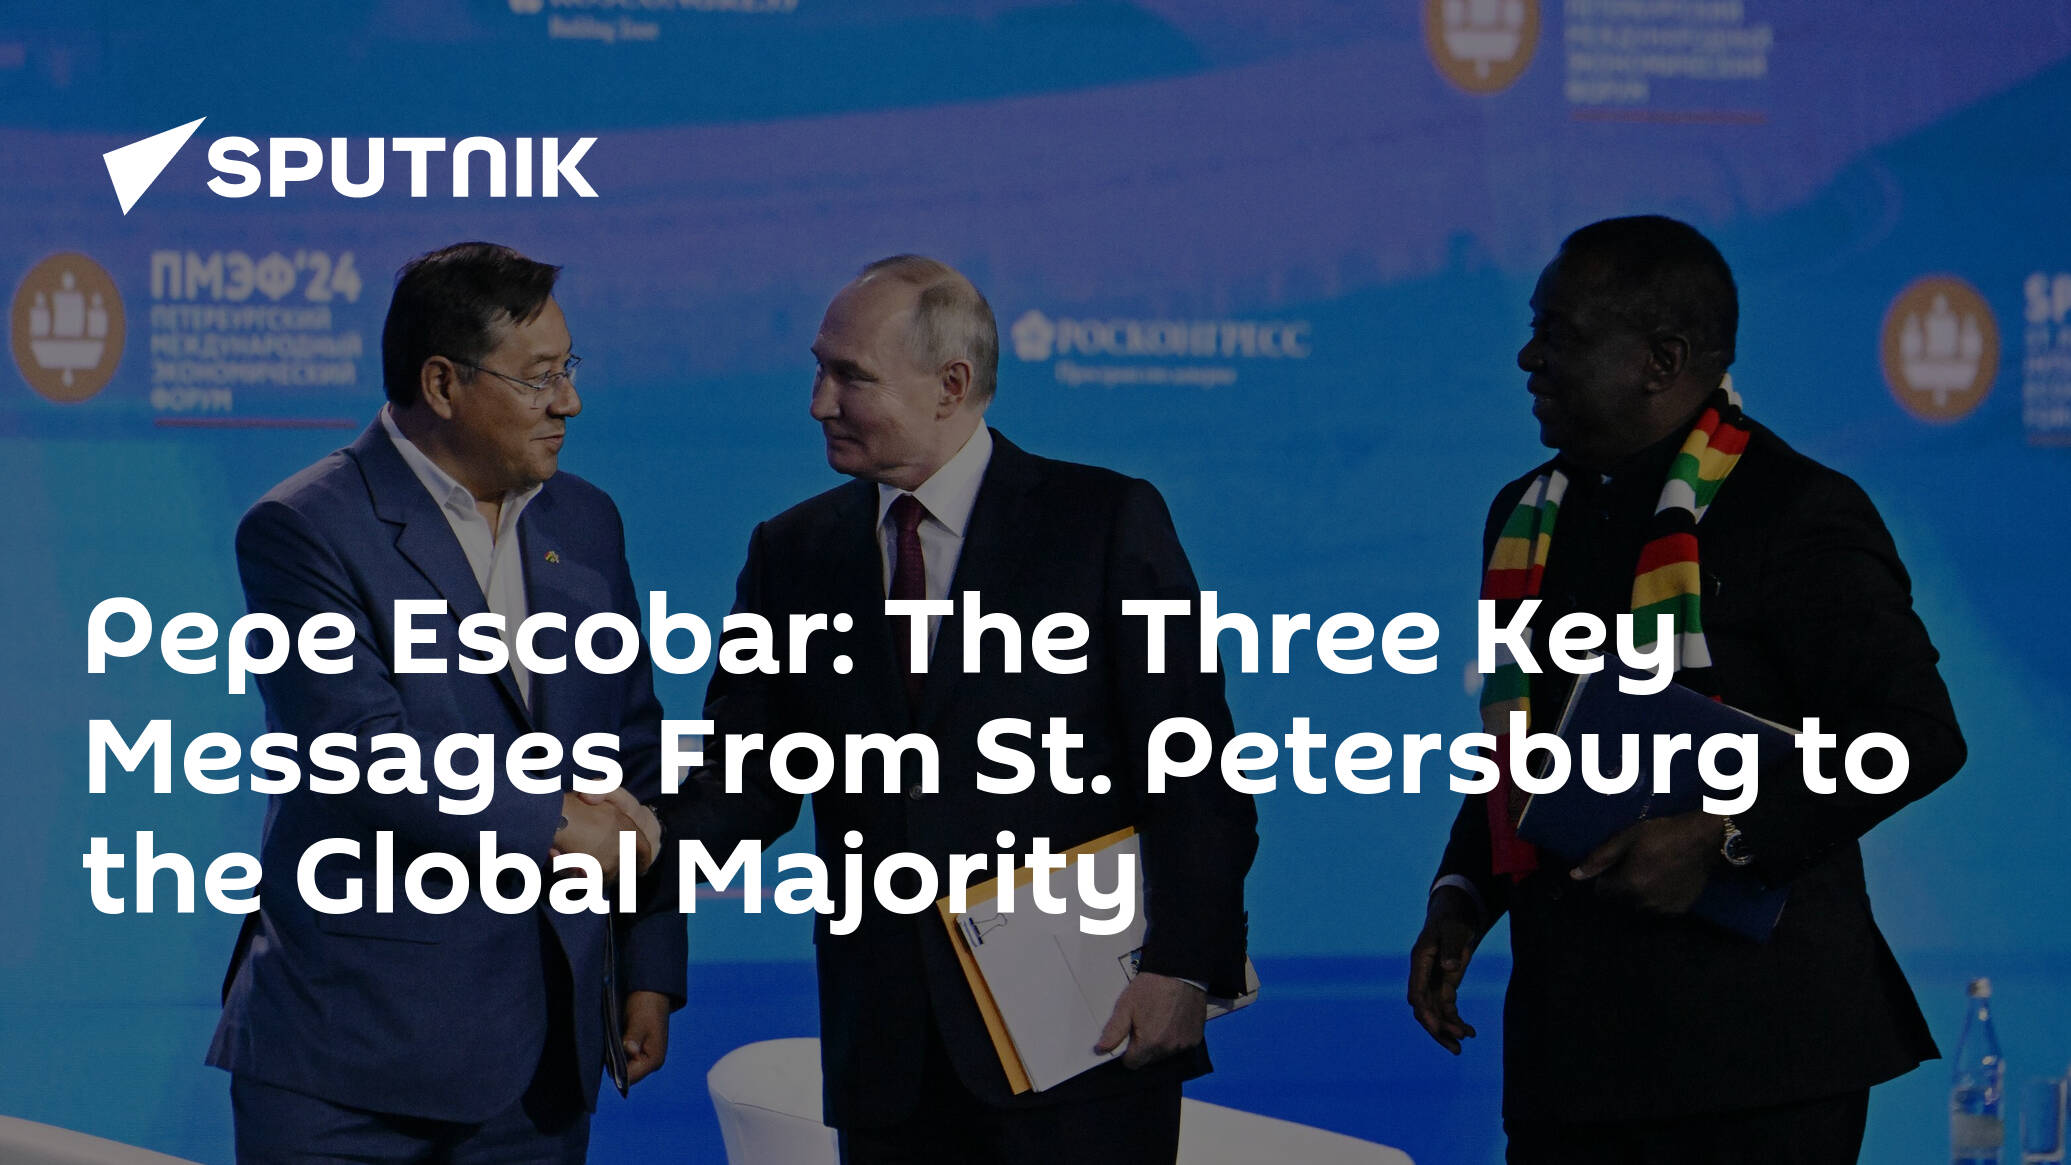 Pepe Escobar: The Three Key Messages From St. Petersburg to the Global Majority